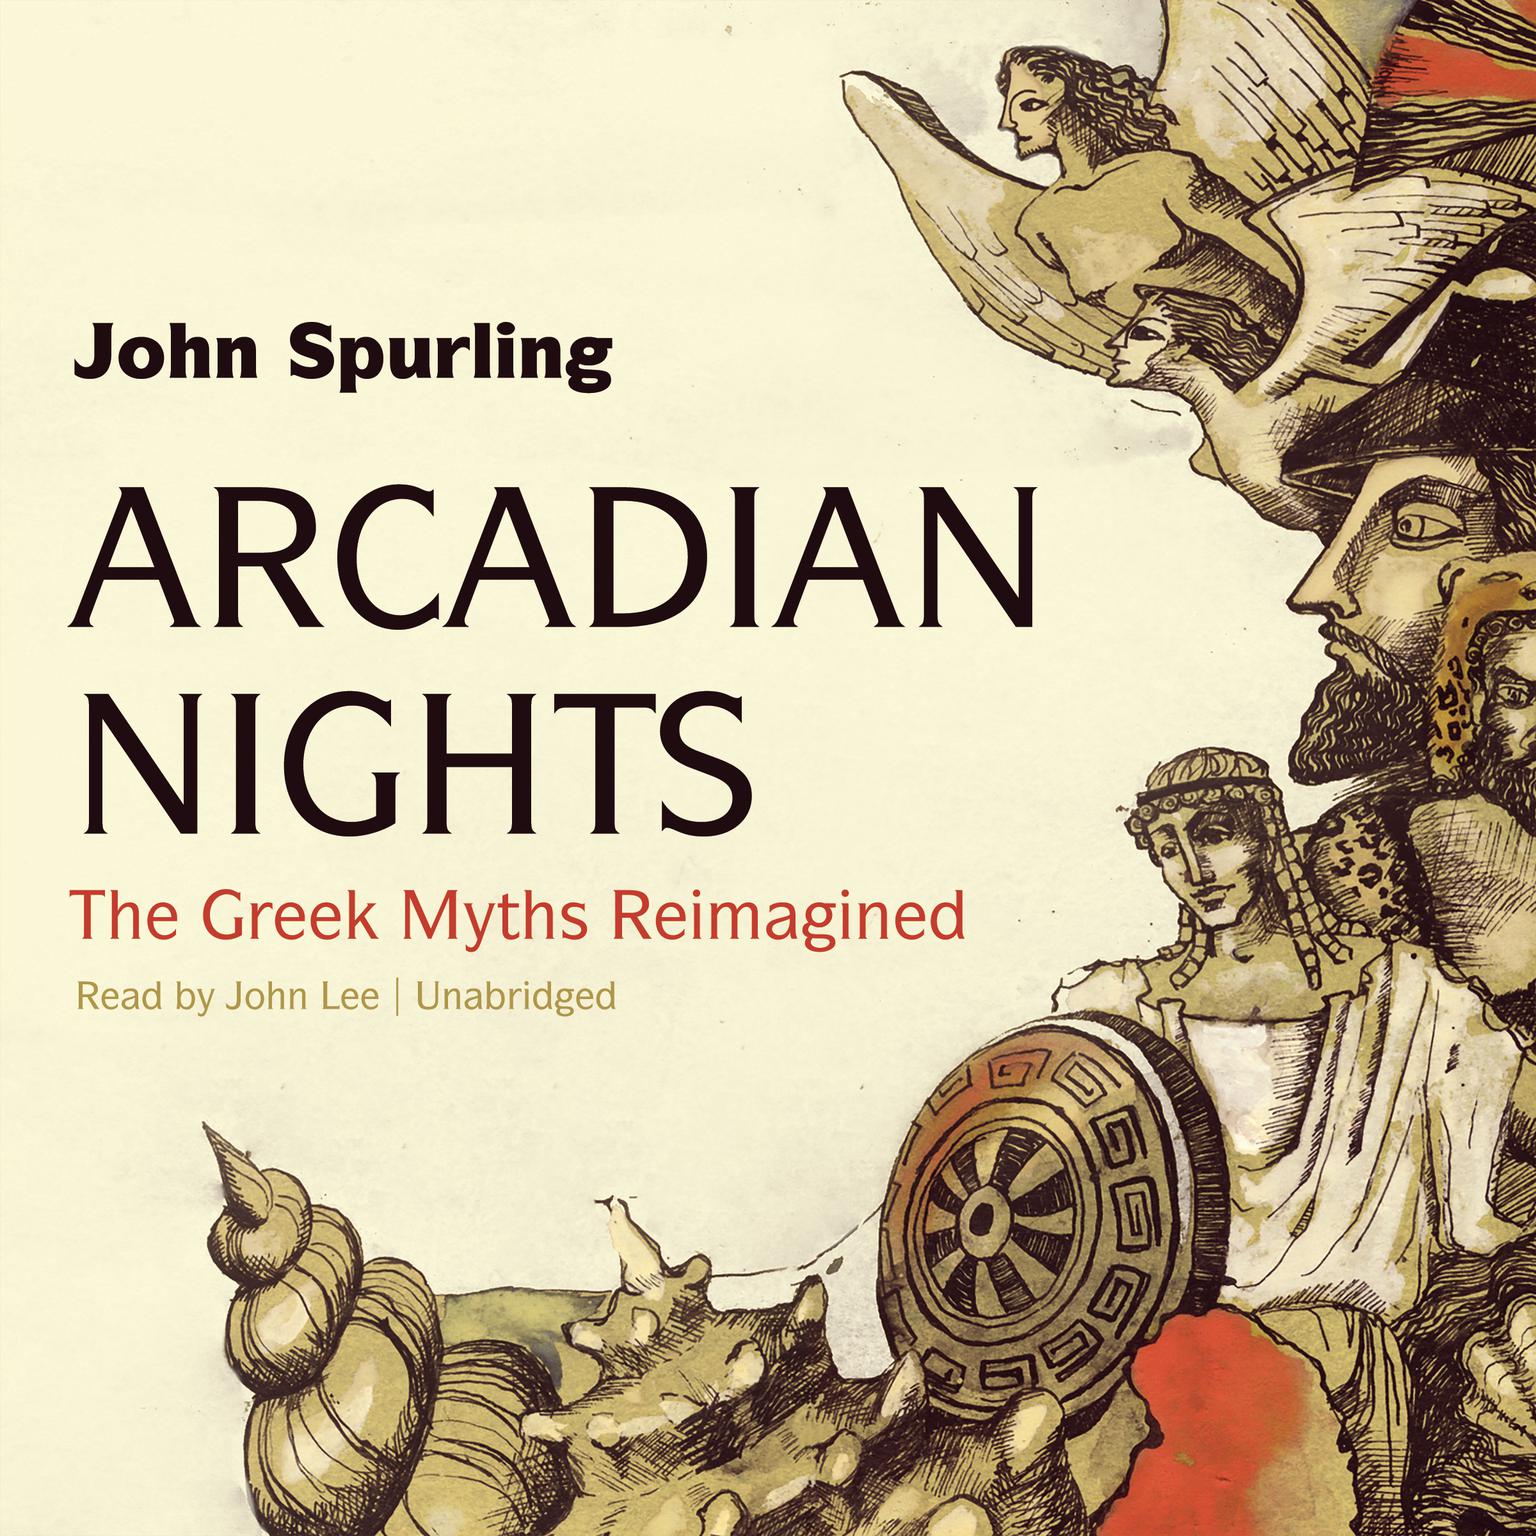 Arcadian Nights: The Greek Myths Reimagined Audiobook, by John Spurling